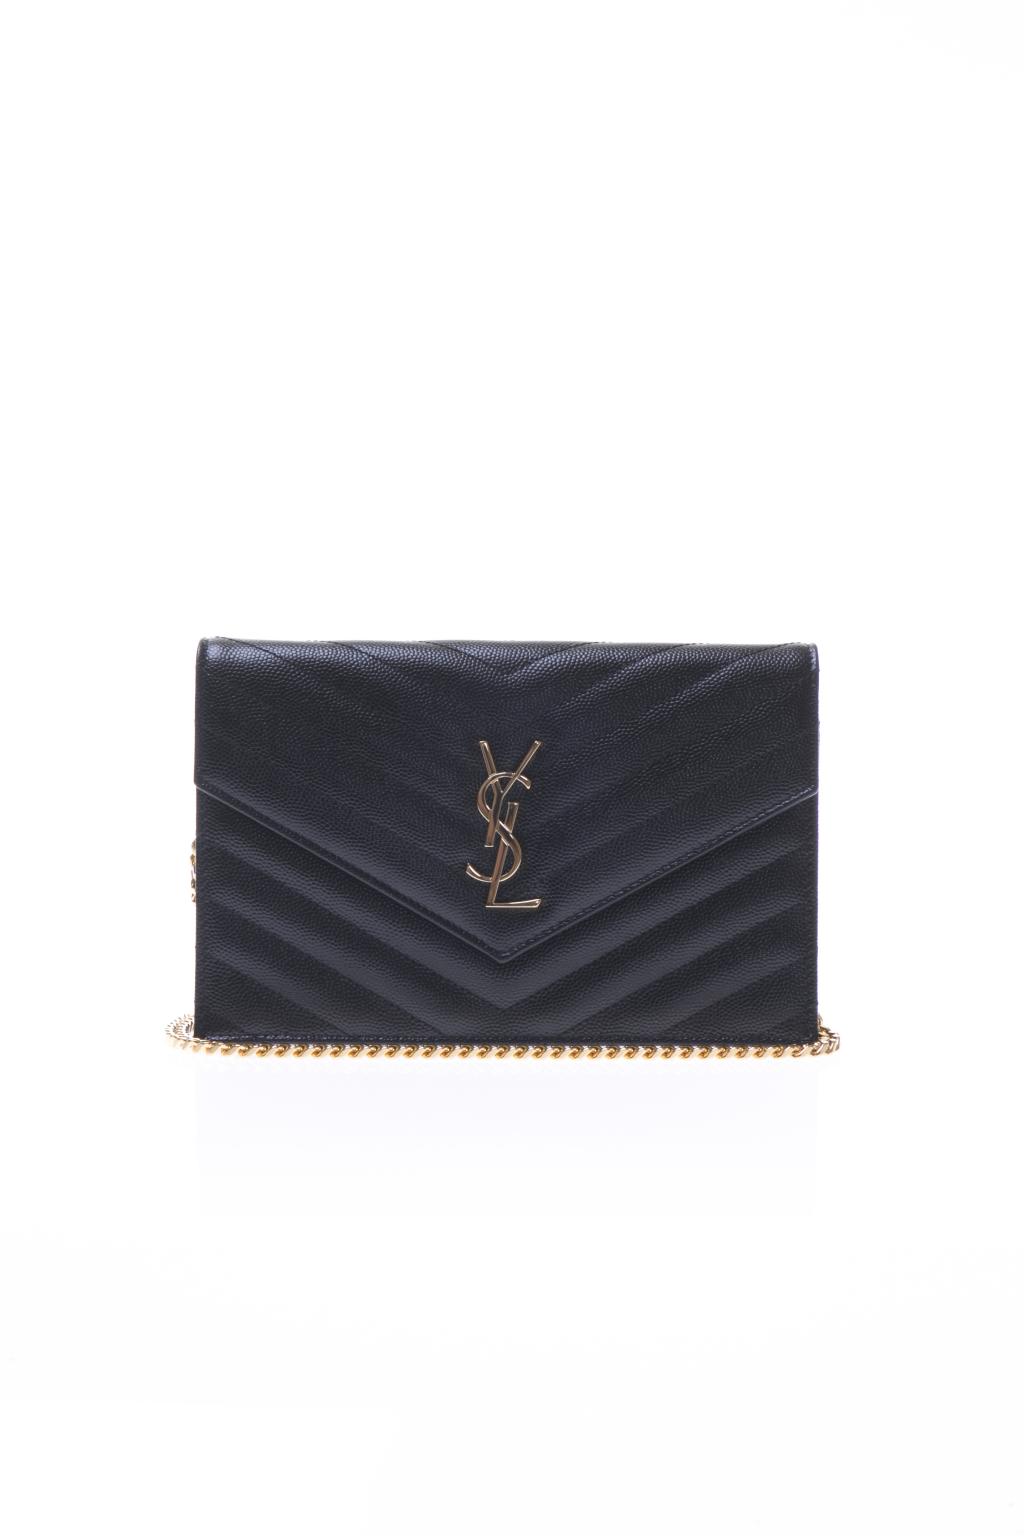 G*CCI, LV, YSL, CH*NEL STYLE WALLET, CARDHOLDER AND PHONE CARRIER